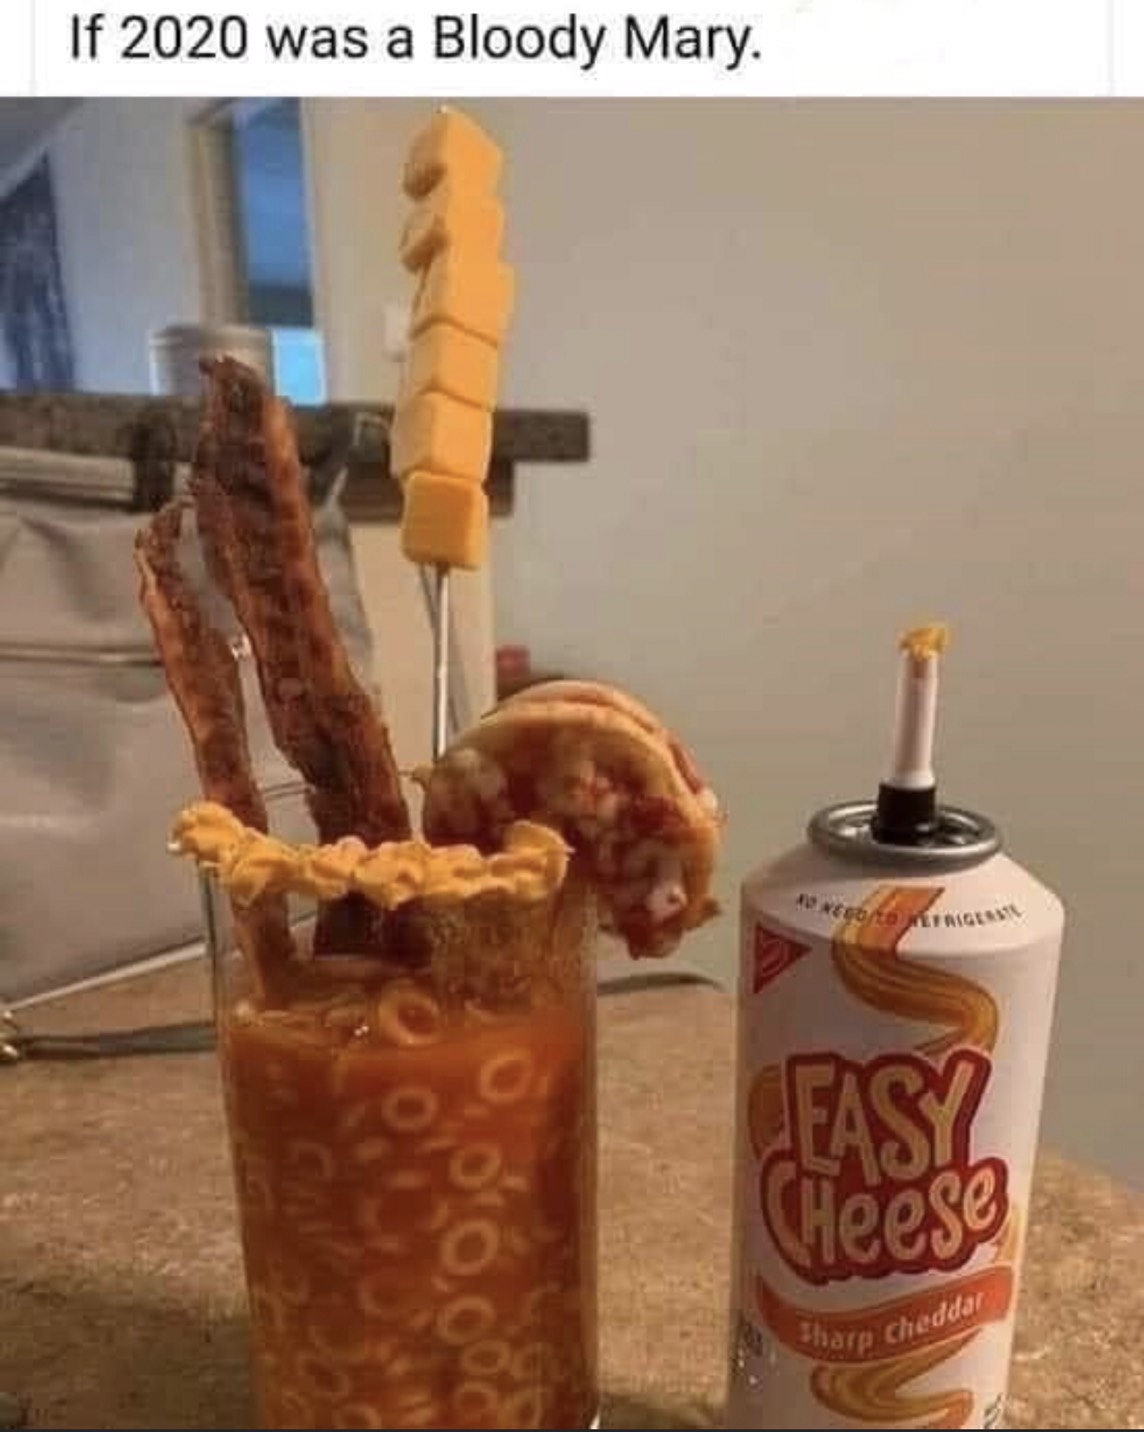 easy cheese - Sharp cheddar If 2020 was a Bloody Mary. 42 Regon ato TIGER16 0.00 Easy Cheese